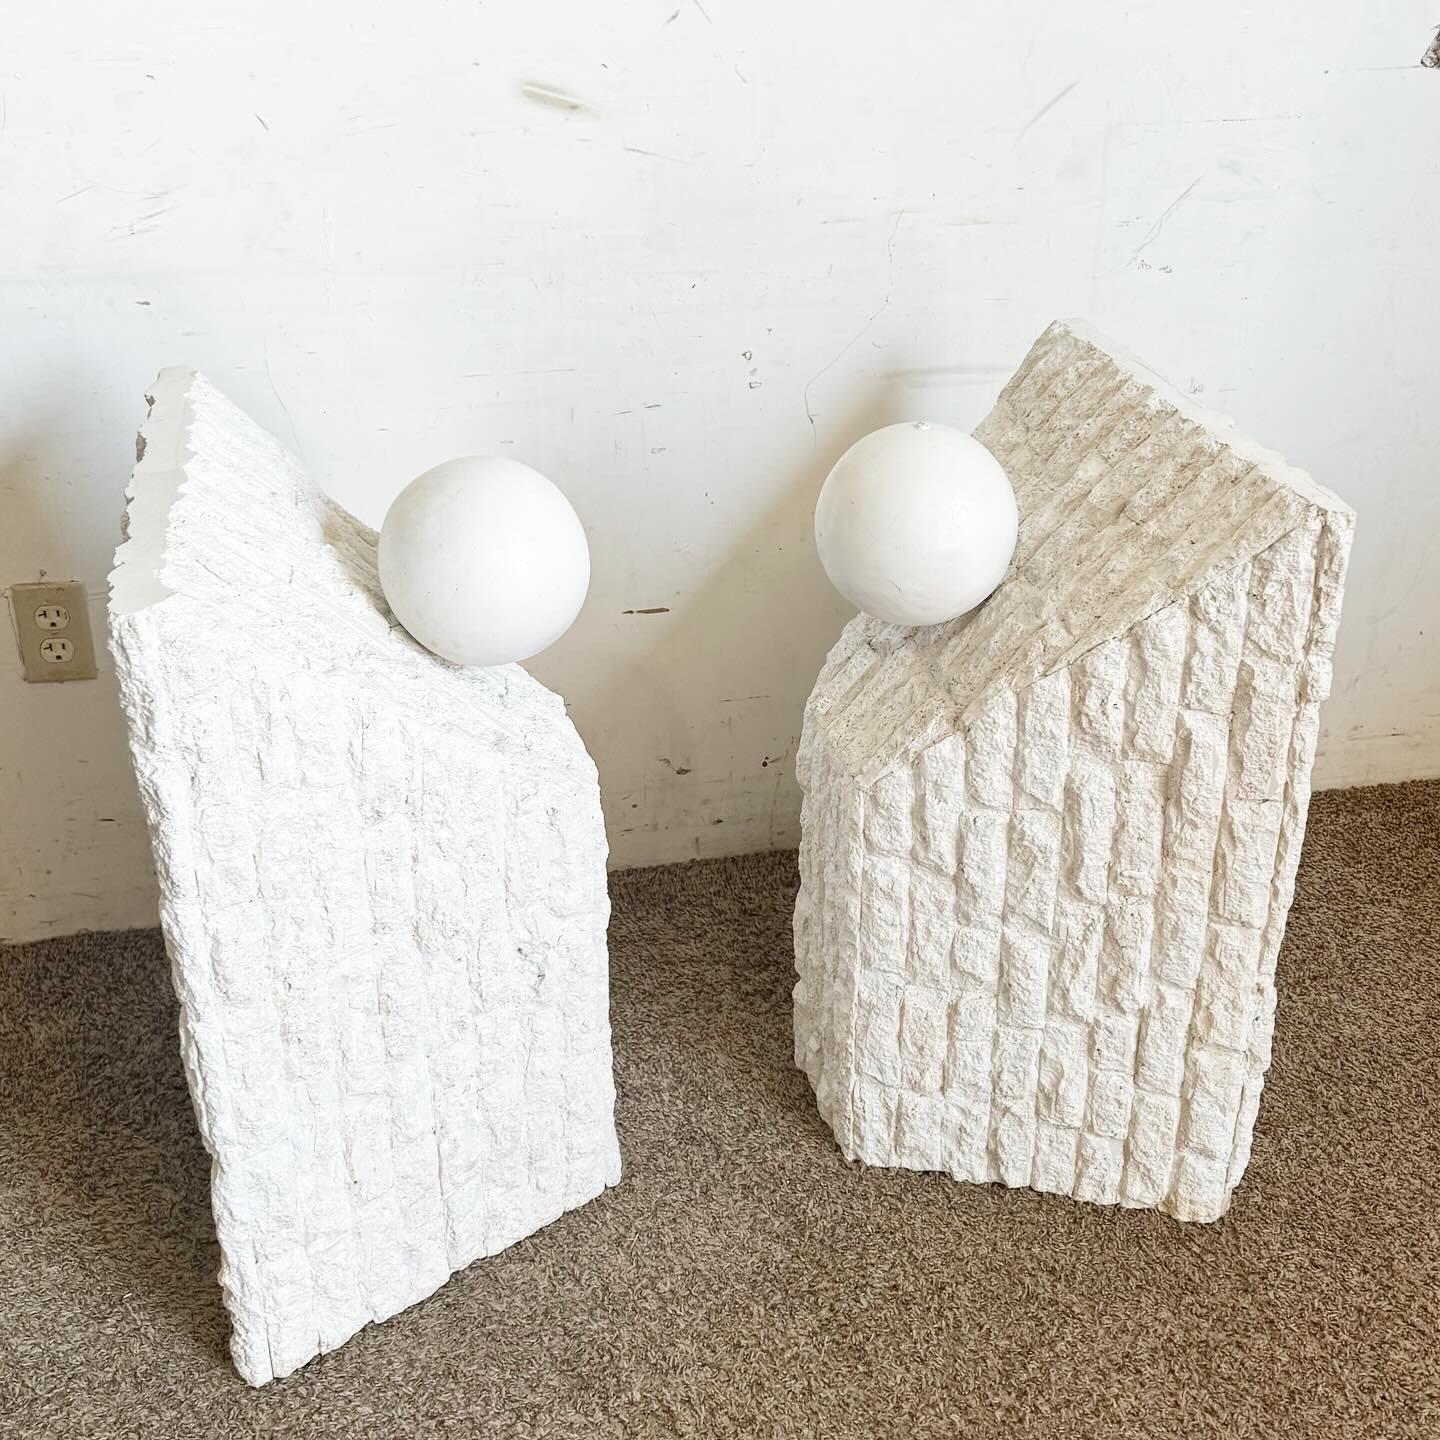 Reimagine your space with this pair of Postmodern Painted White Tessellated Stone Table Bases. These bases blend a contemporary aesthetic with classic design, featuring clean lines and geometric patterns in a fresh white paint. Perfect as supports